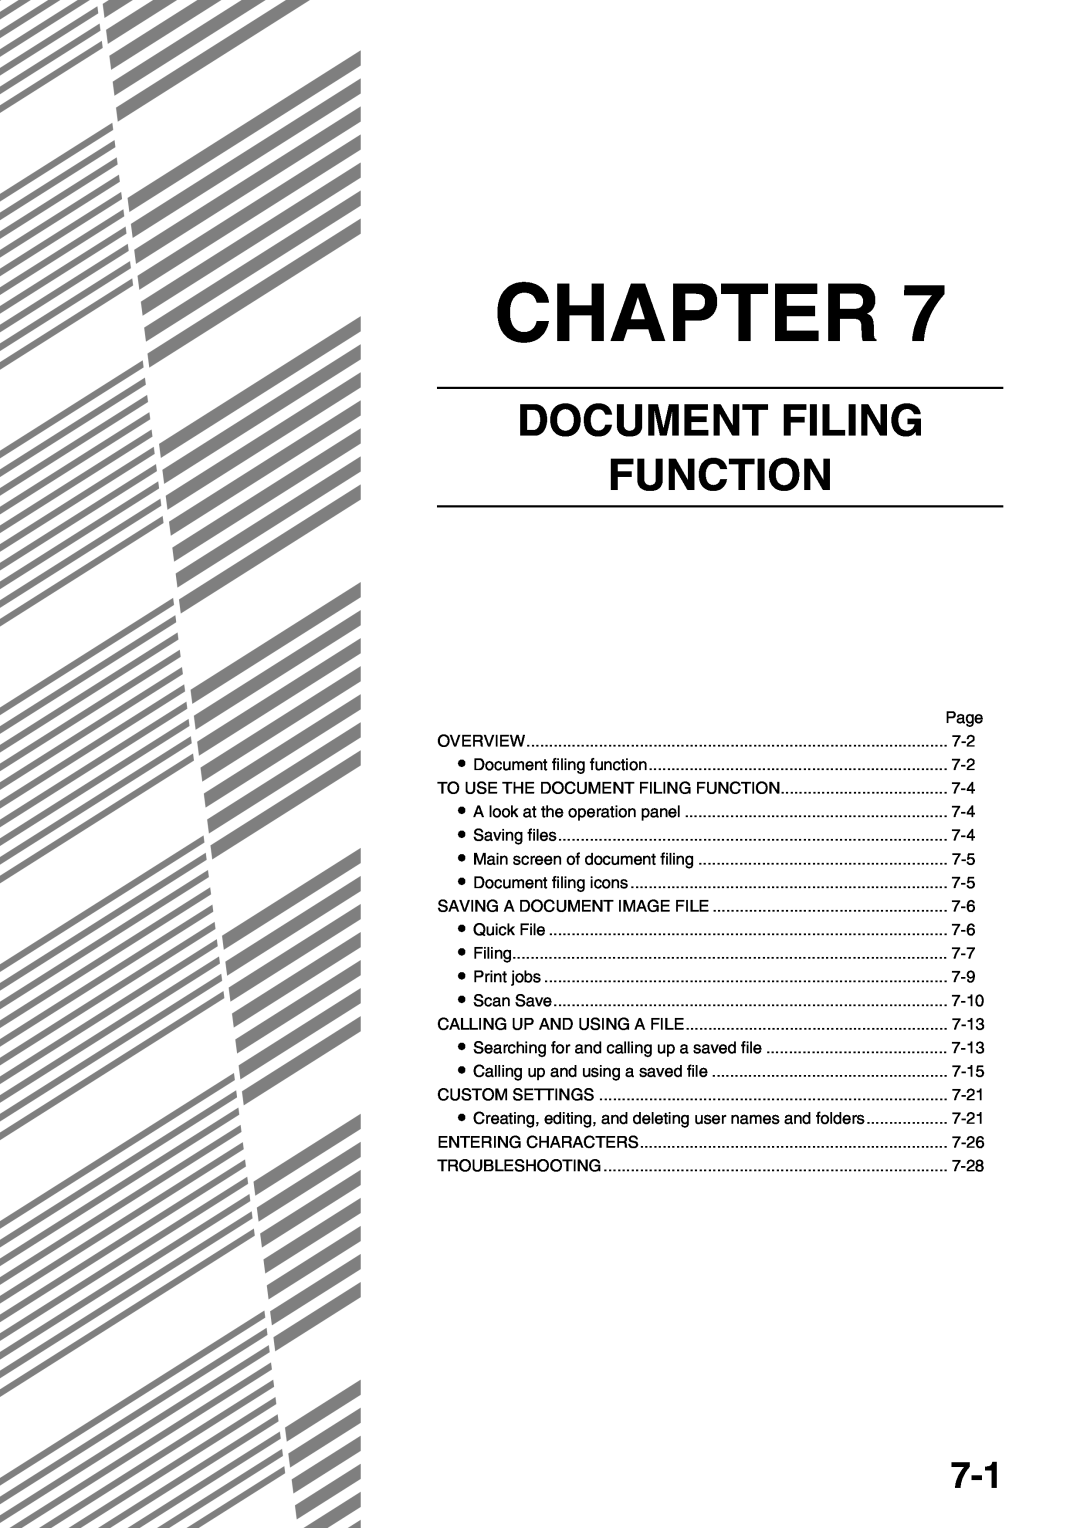 Sharp AR-M700N, AR-M700U, AR-M550N, AR-M620N, AR-M550U, AR-M620U specifications Document Filing Function, Chapter 